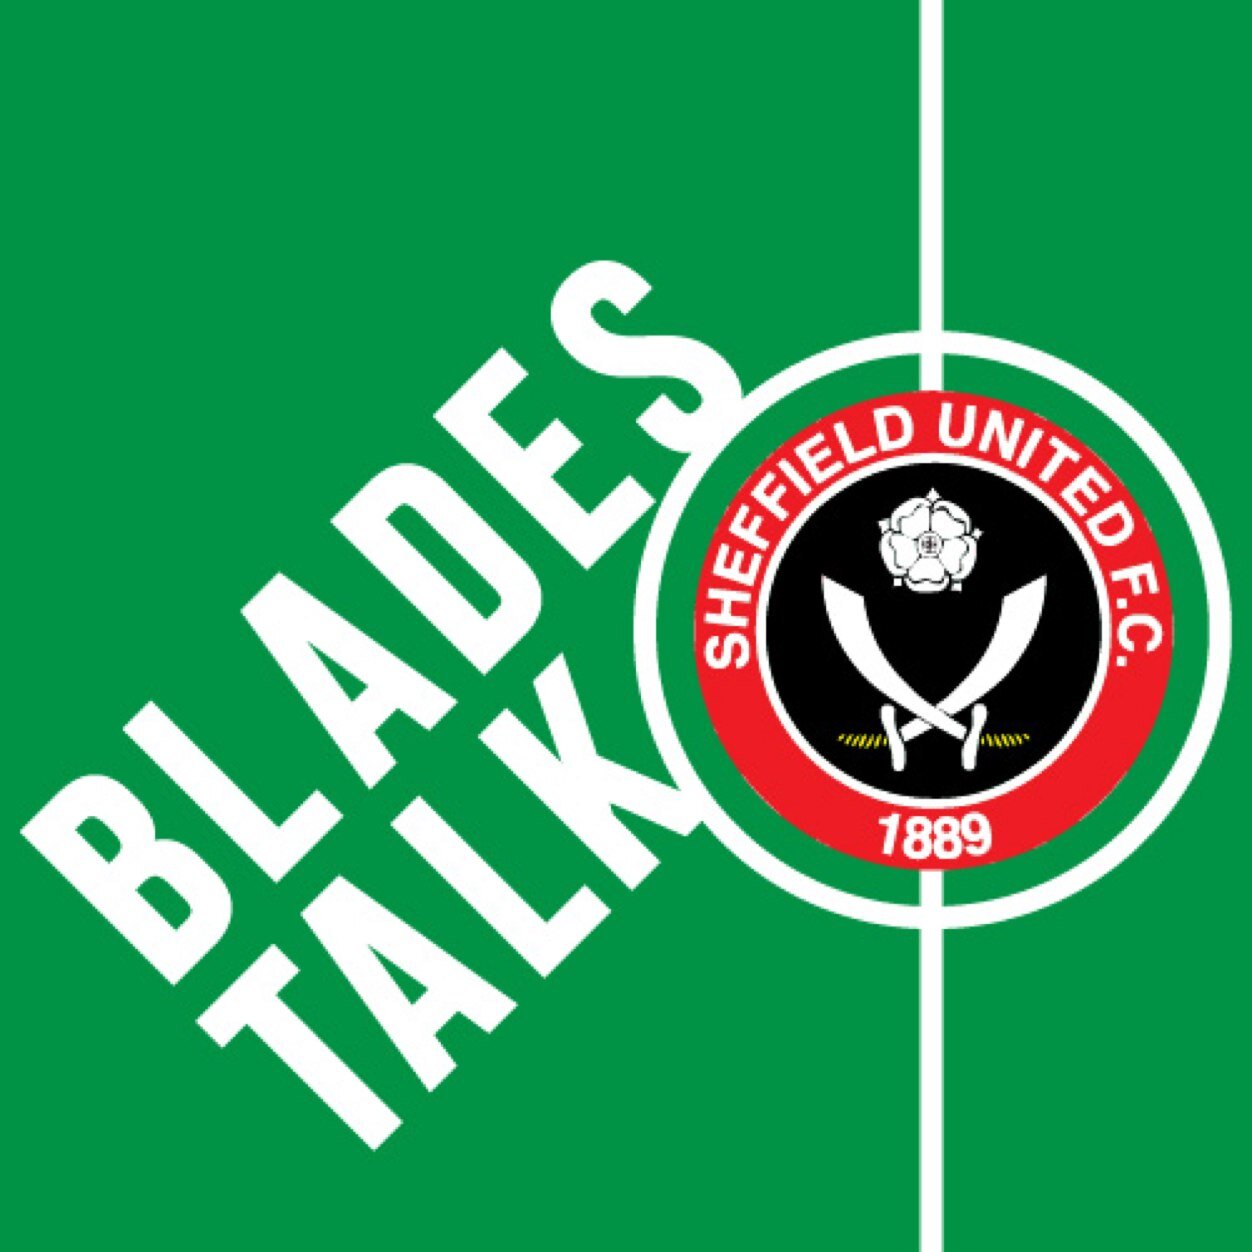 Follow us blades, with views from the fans in the stands, put your points across here about the blades. #sufc #twitterblades